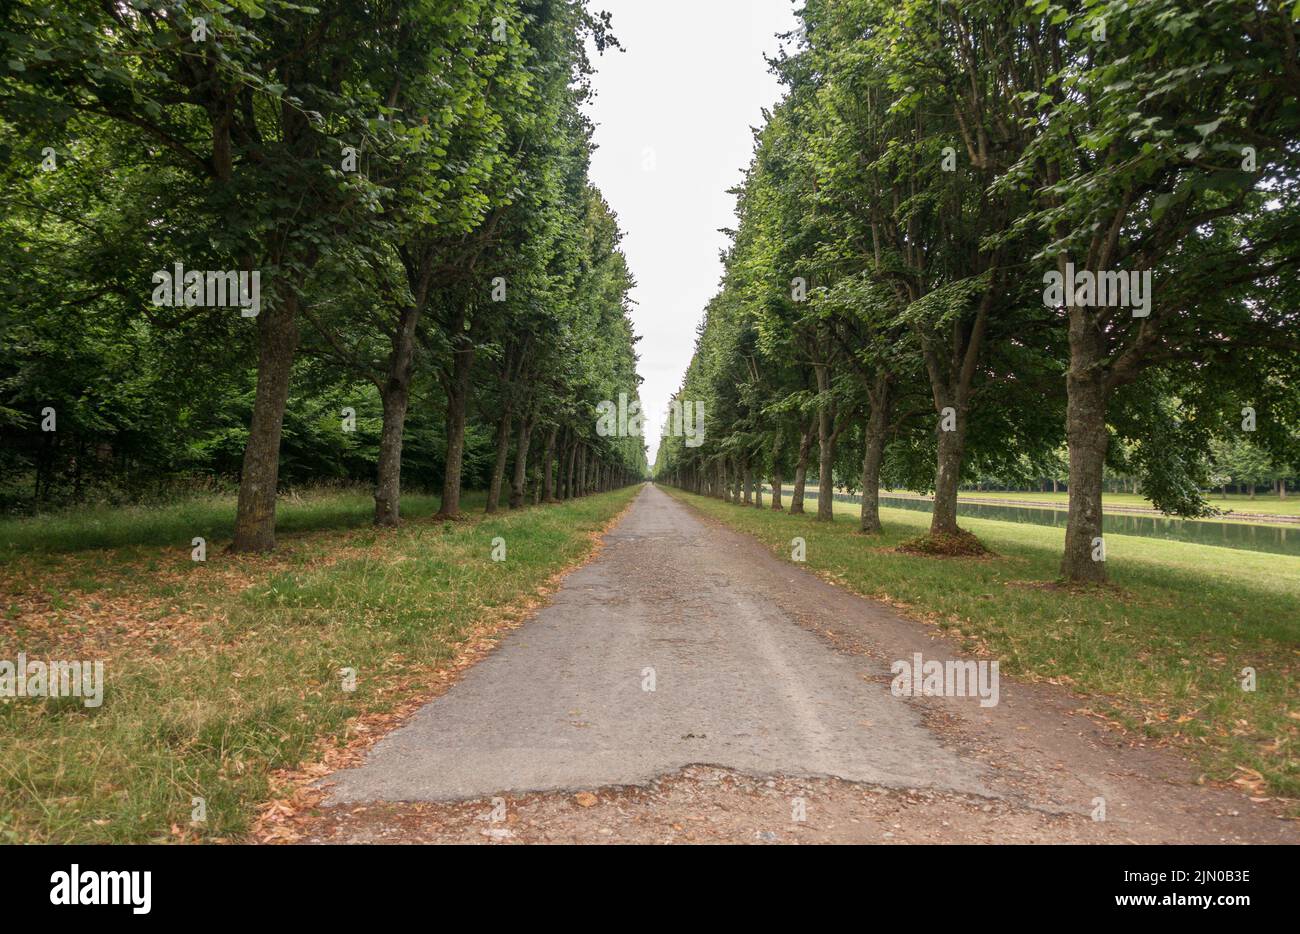 Road next to The Grand Canal in the gardens of the Chateau de Fontainebleau, France. Stock Photo